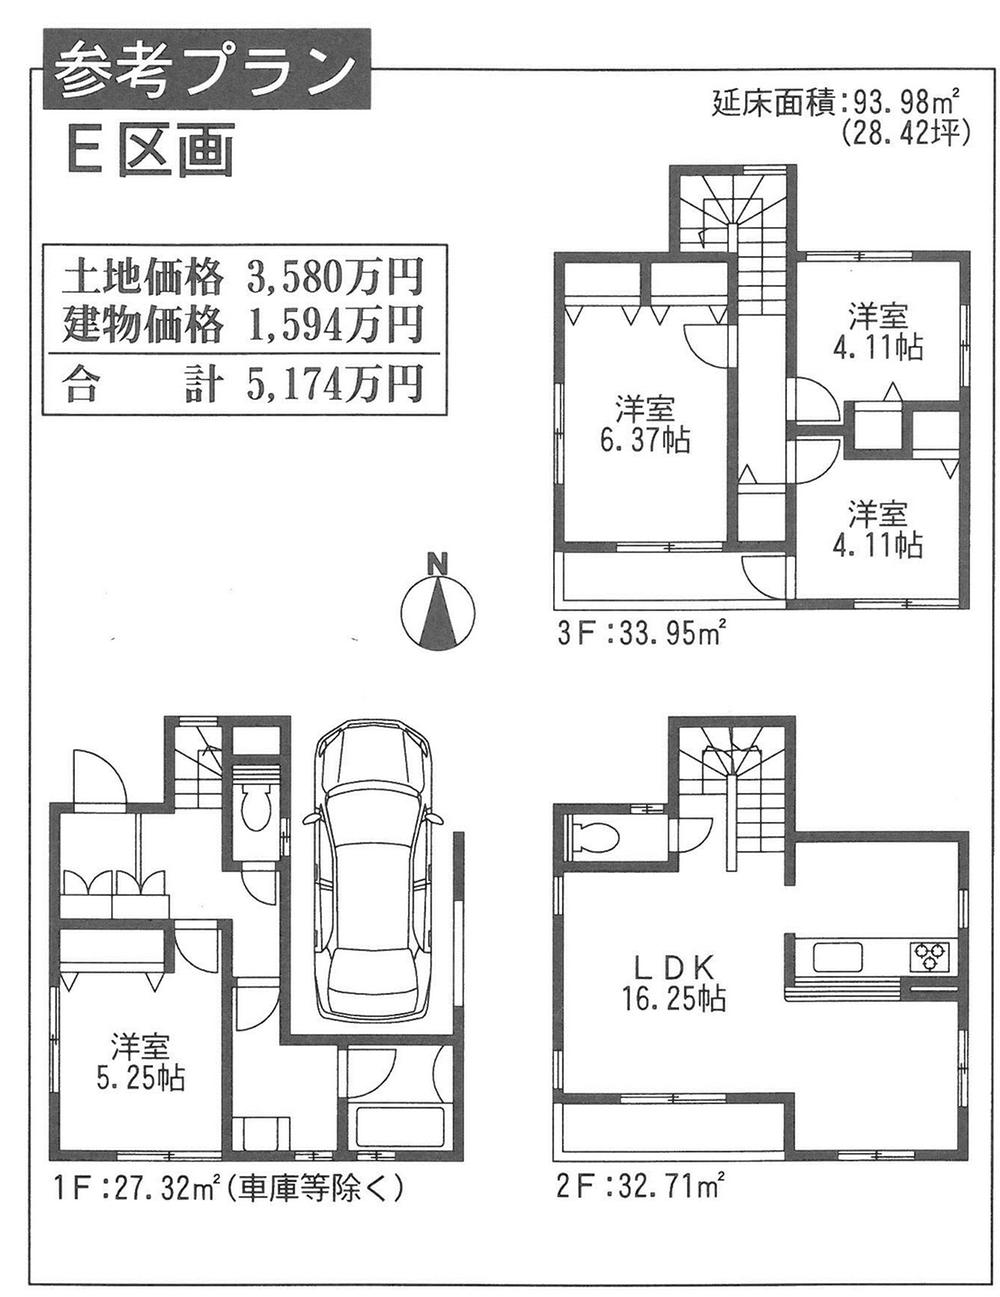 Other building plan example. Building plan example ( E No. land) Building Price      15,940,000 yen, Building area   93.98 sq m